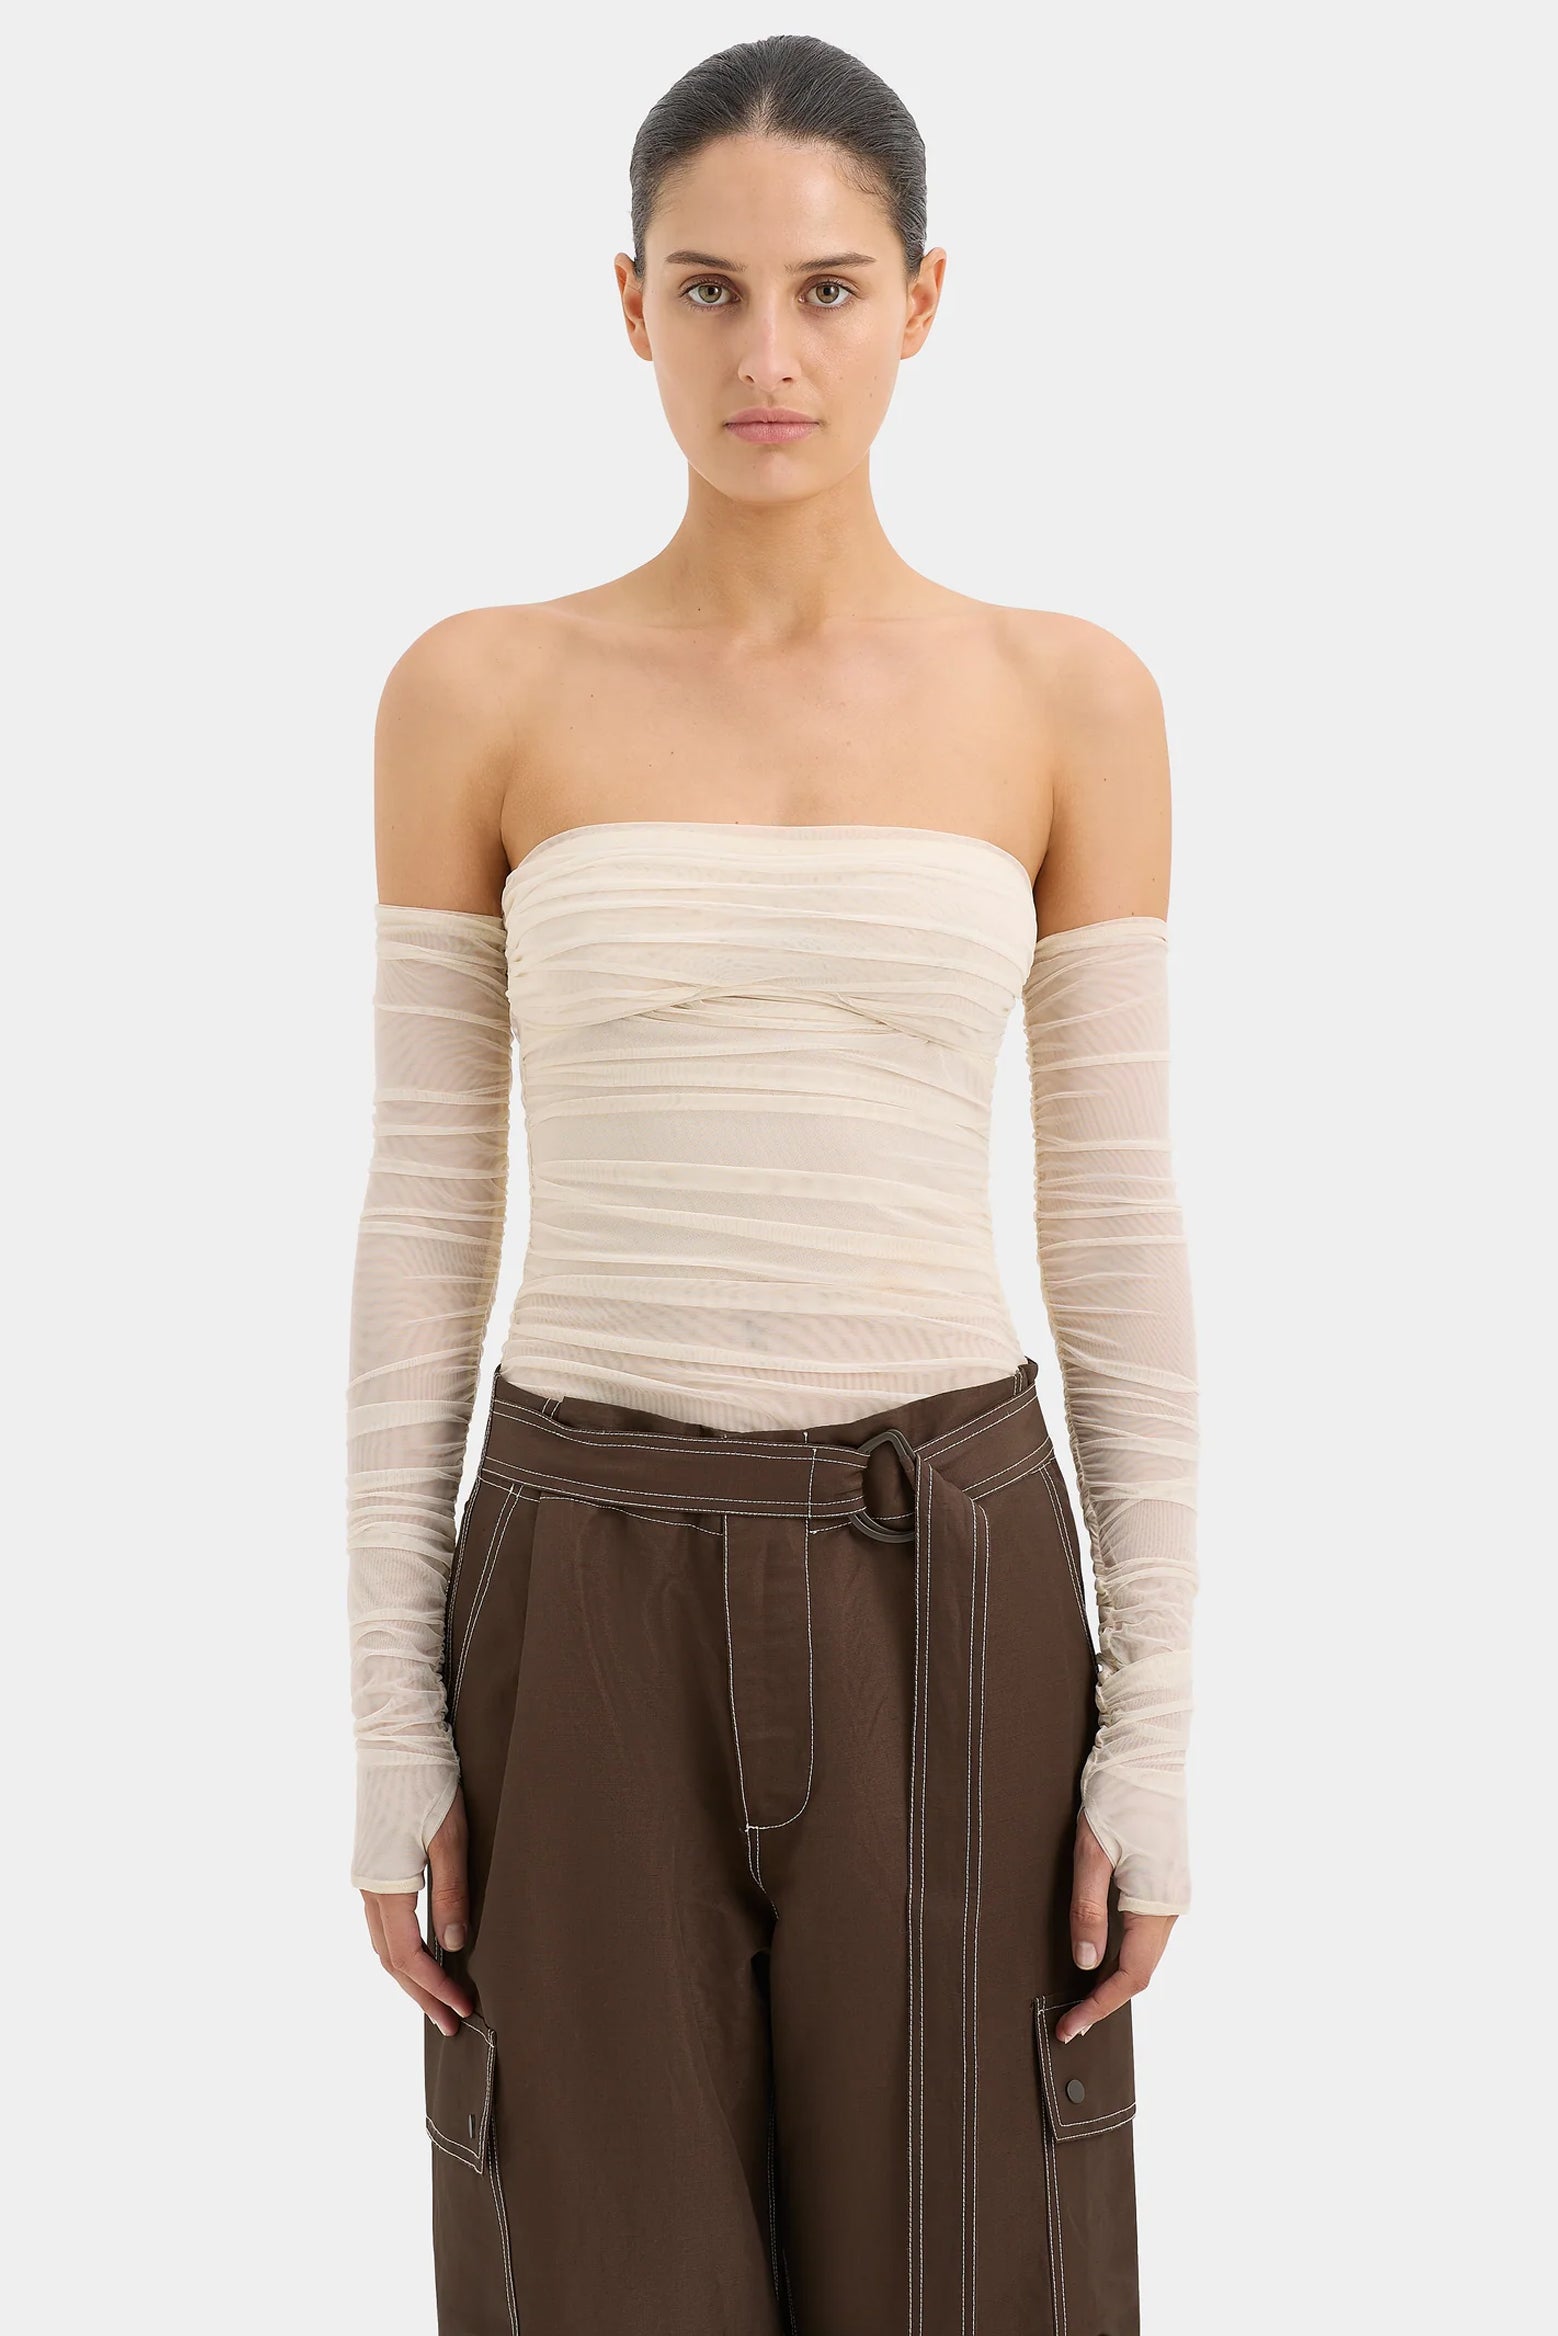 SIR Jacques Off Shoulder Top in Ecru available at The New Trend Australia.